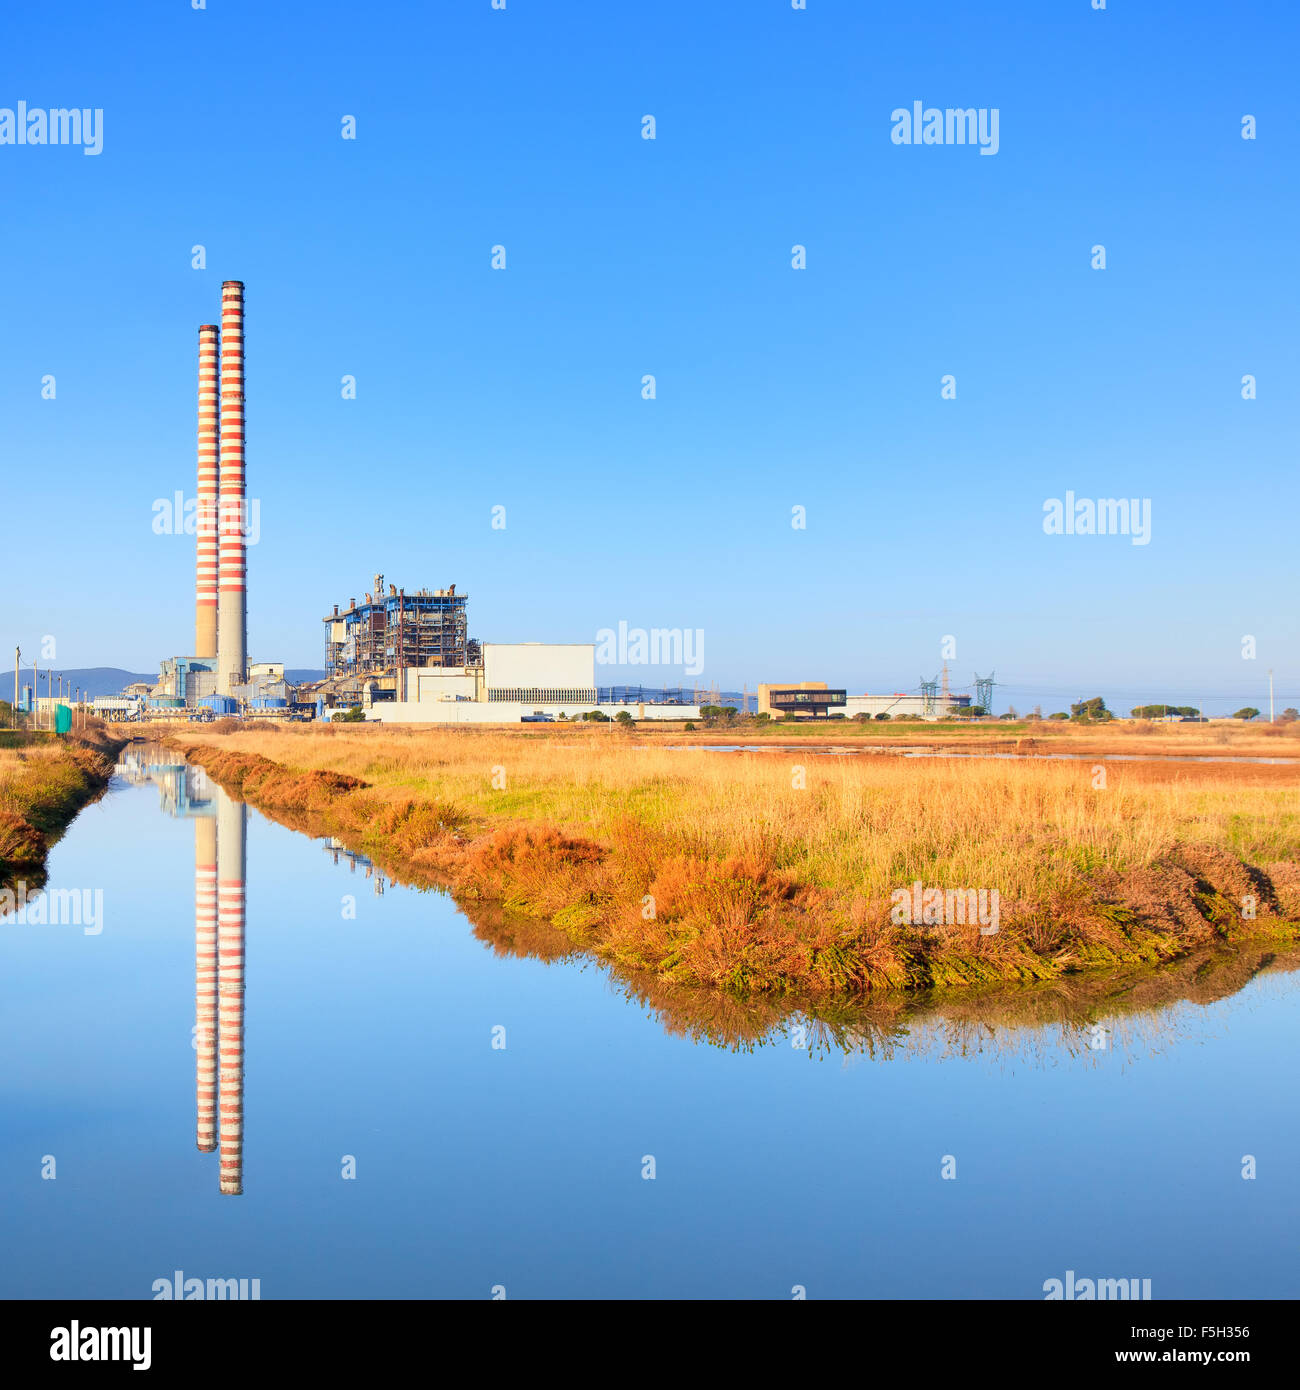 Power plant with two smoke stacks, green field and reflection on water Stock Photo